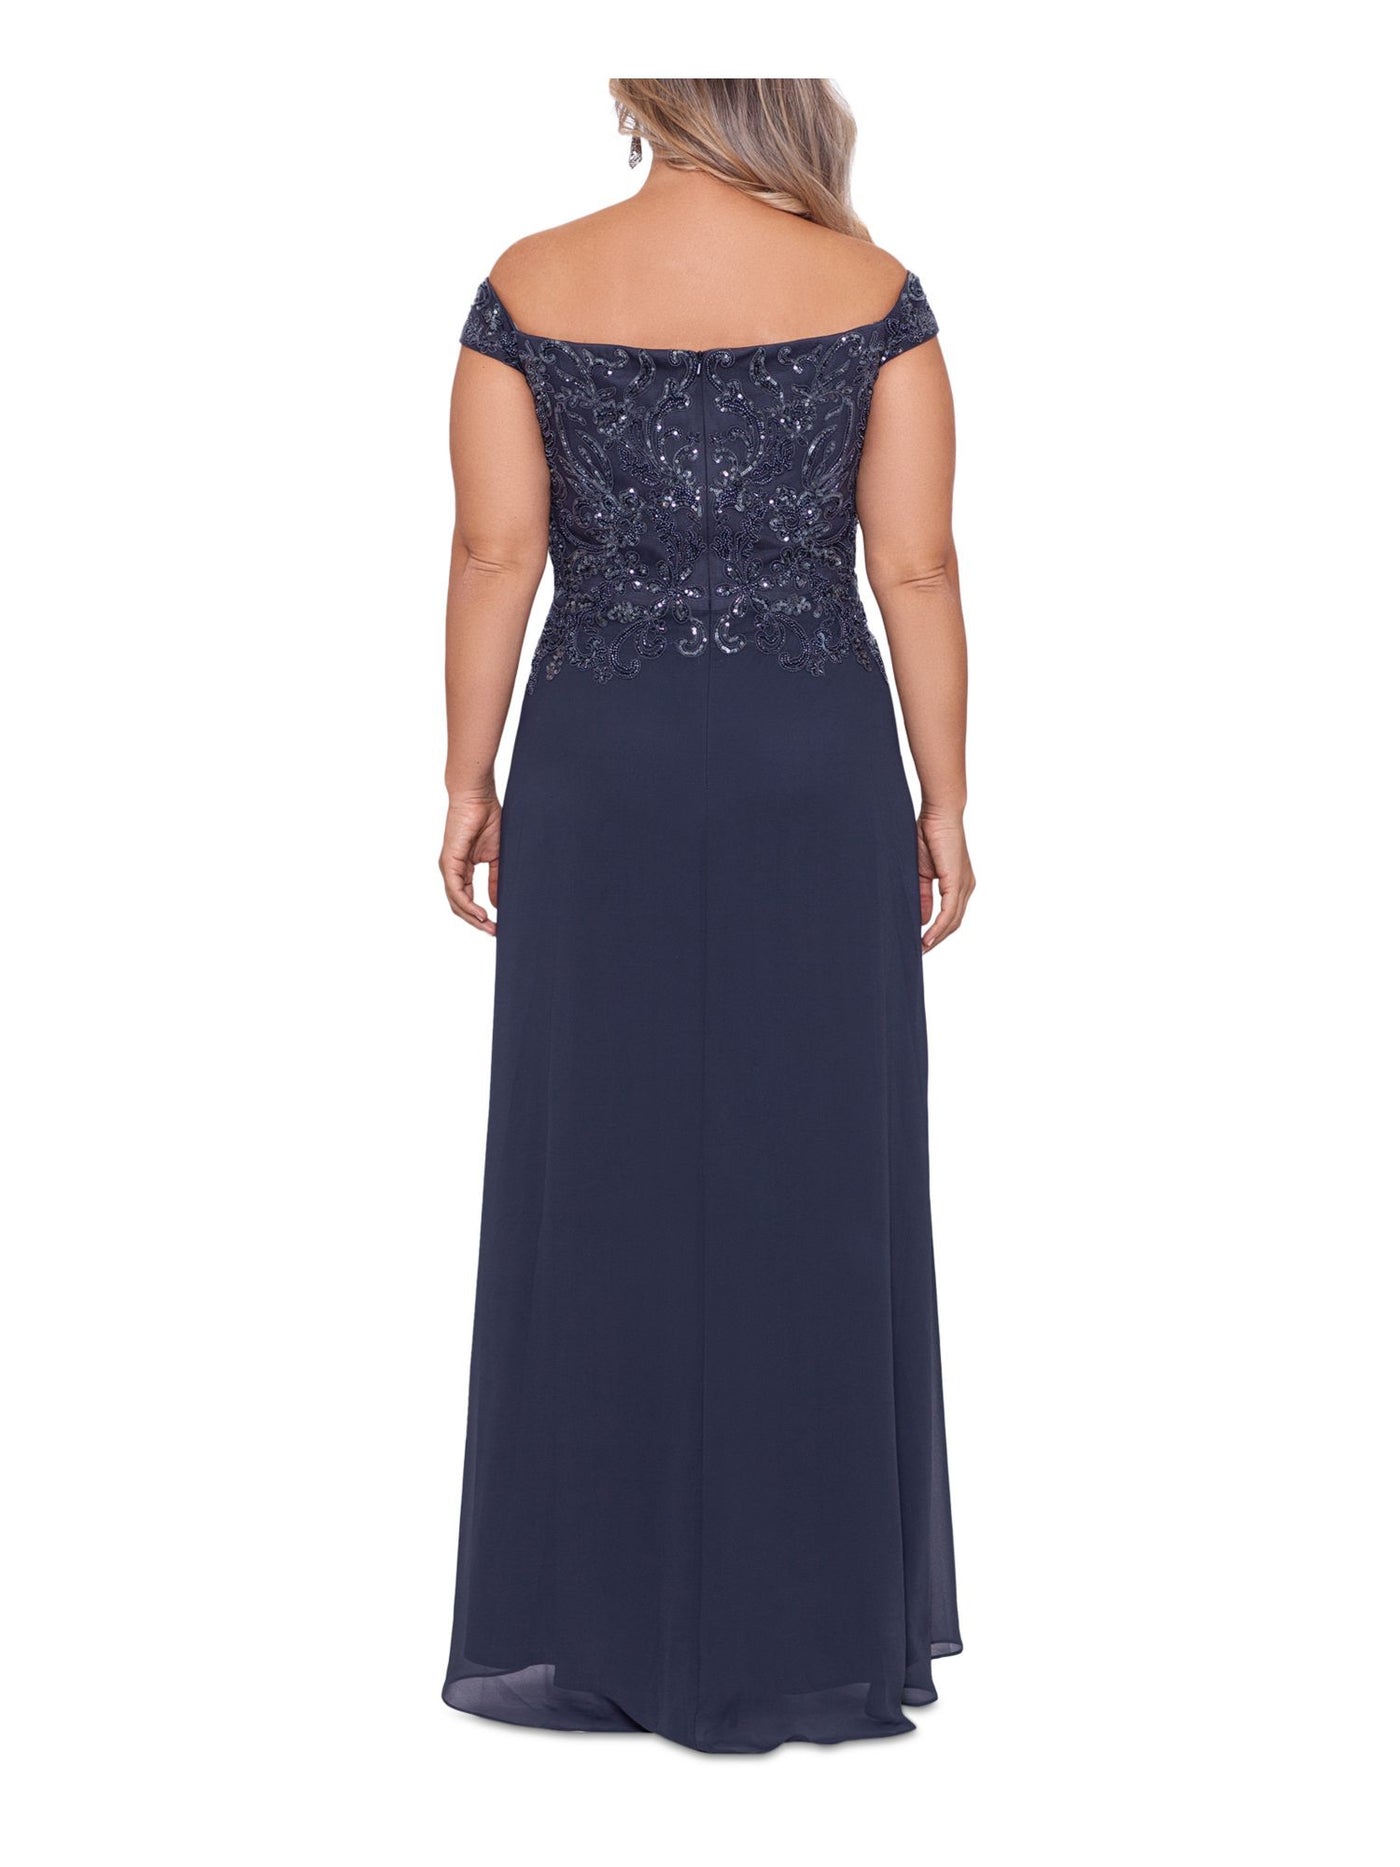 BETSY & ADAM Womens Navy Embellished Zippered Sheer Lined Short Sleeve Off Shoulder Full-Length Formal Gown Dress 22W